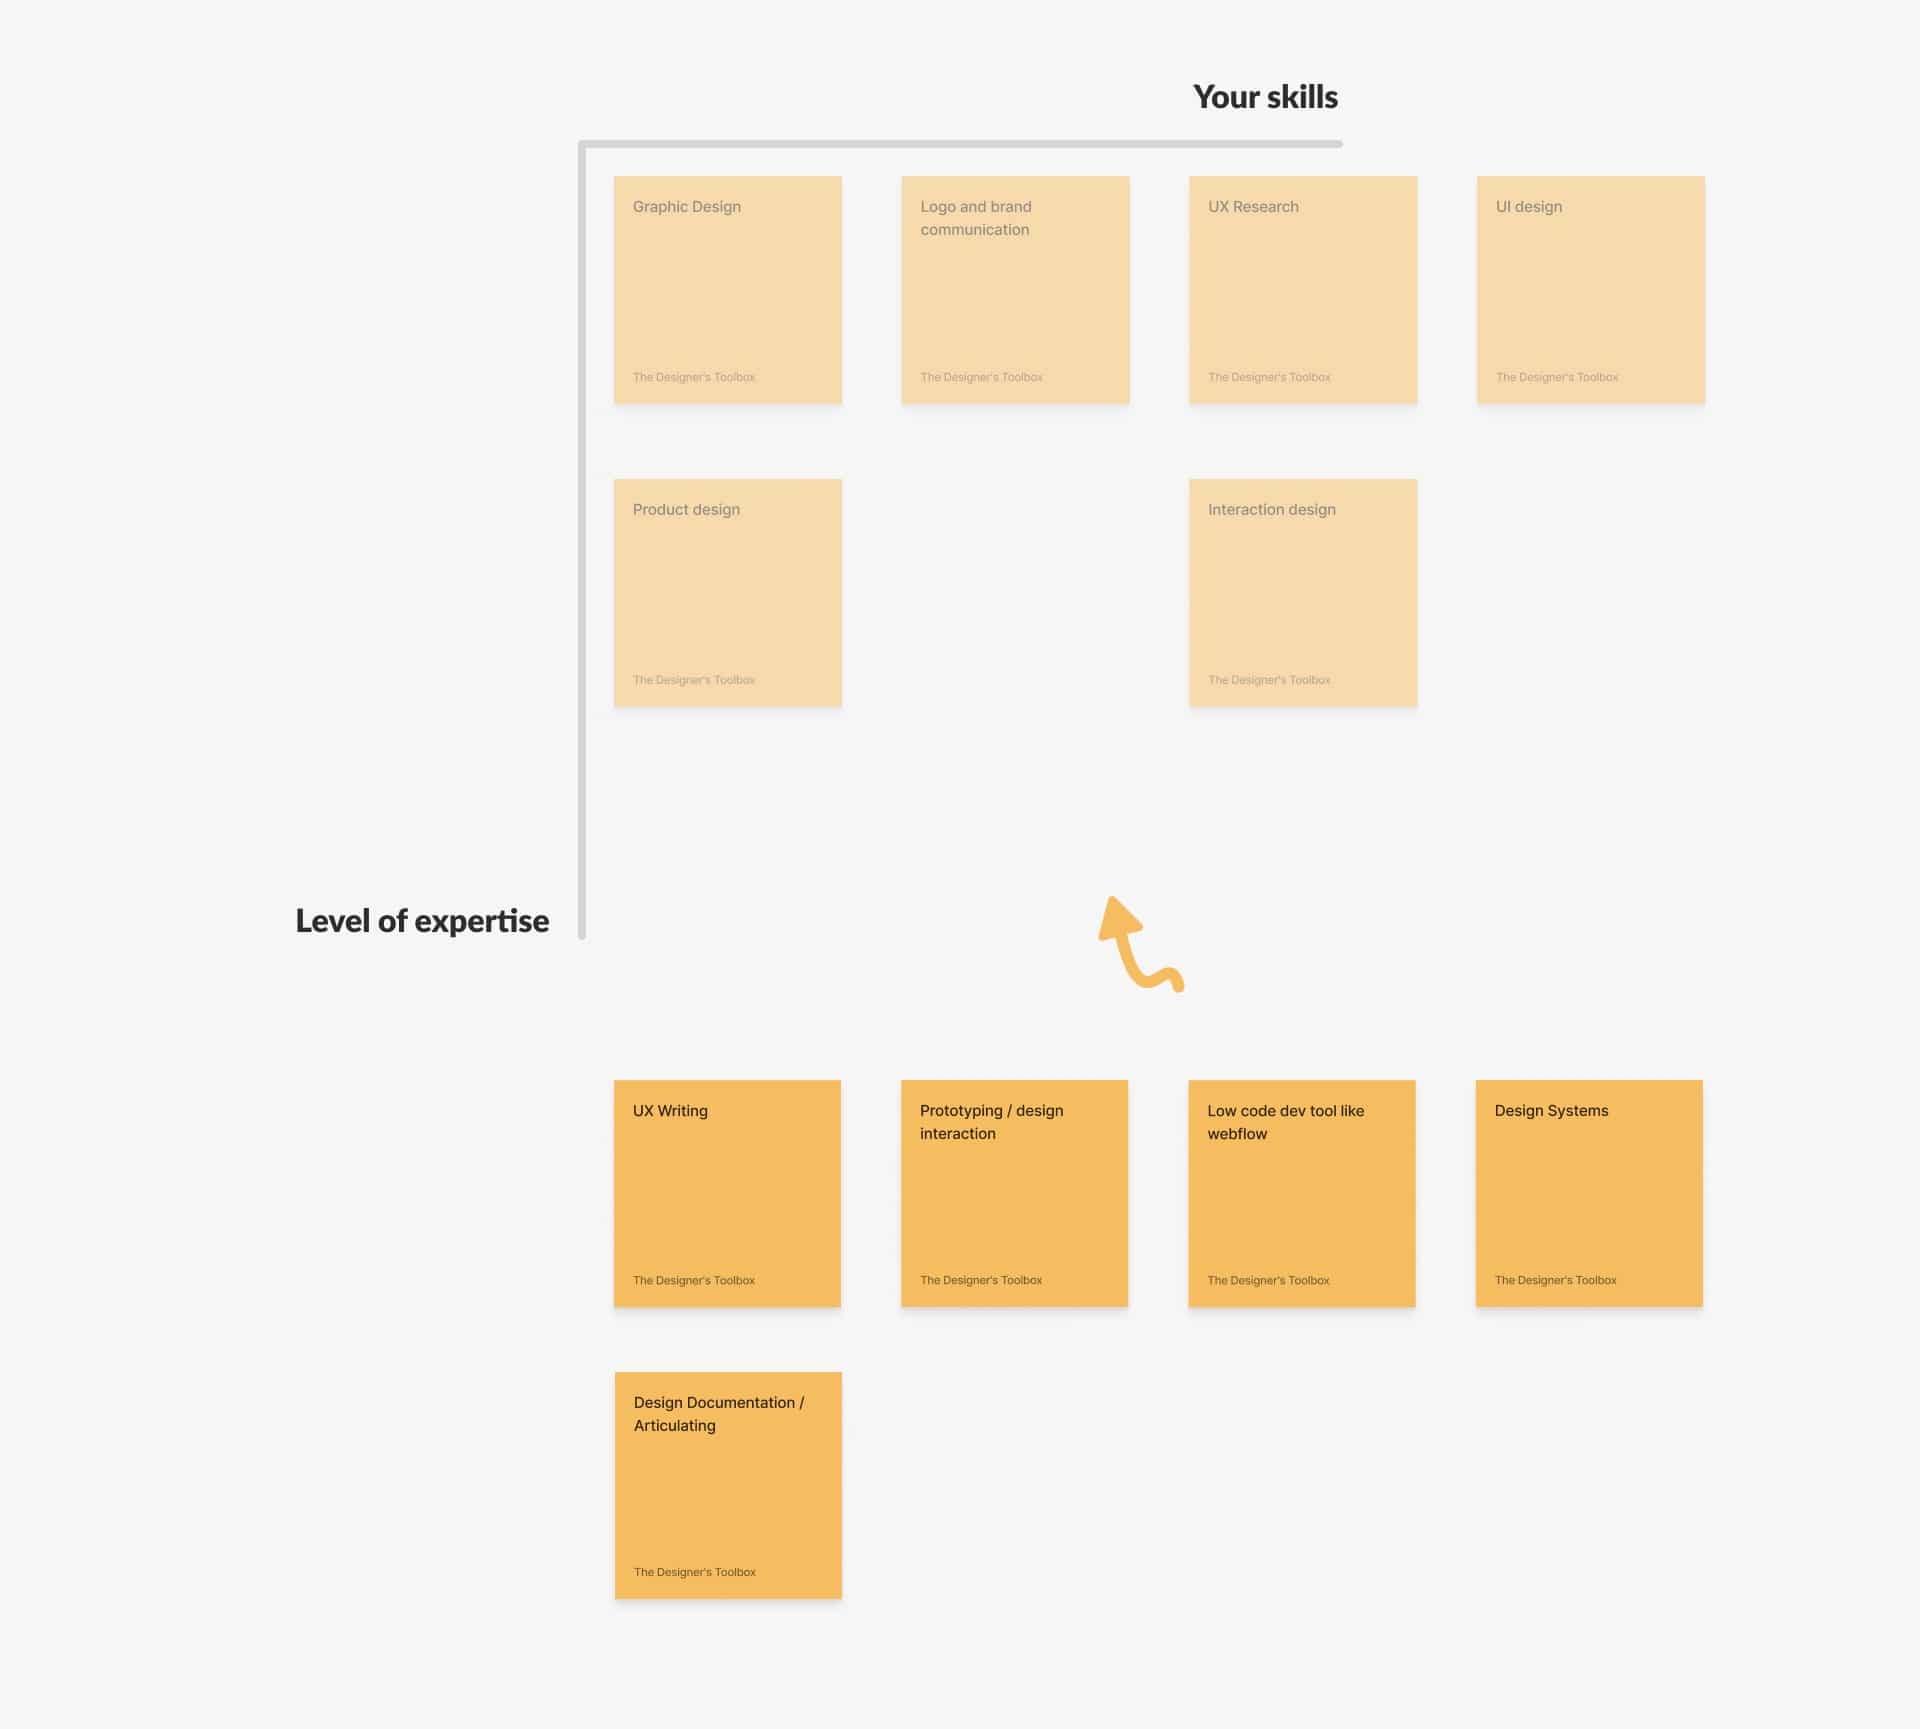 Next steps after building your first T-shaped design skill overview